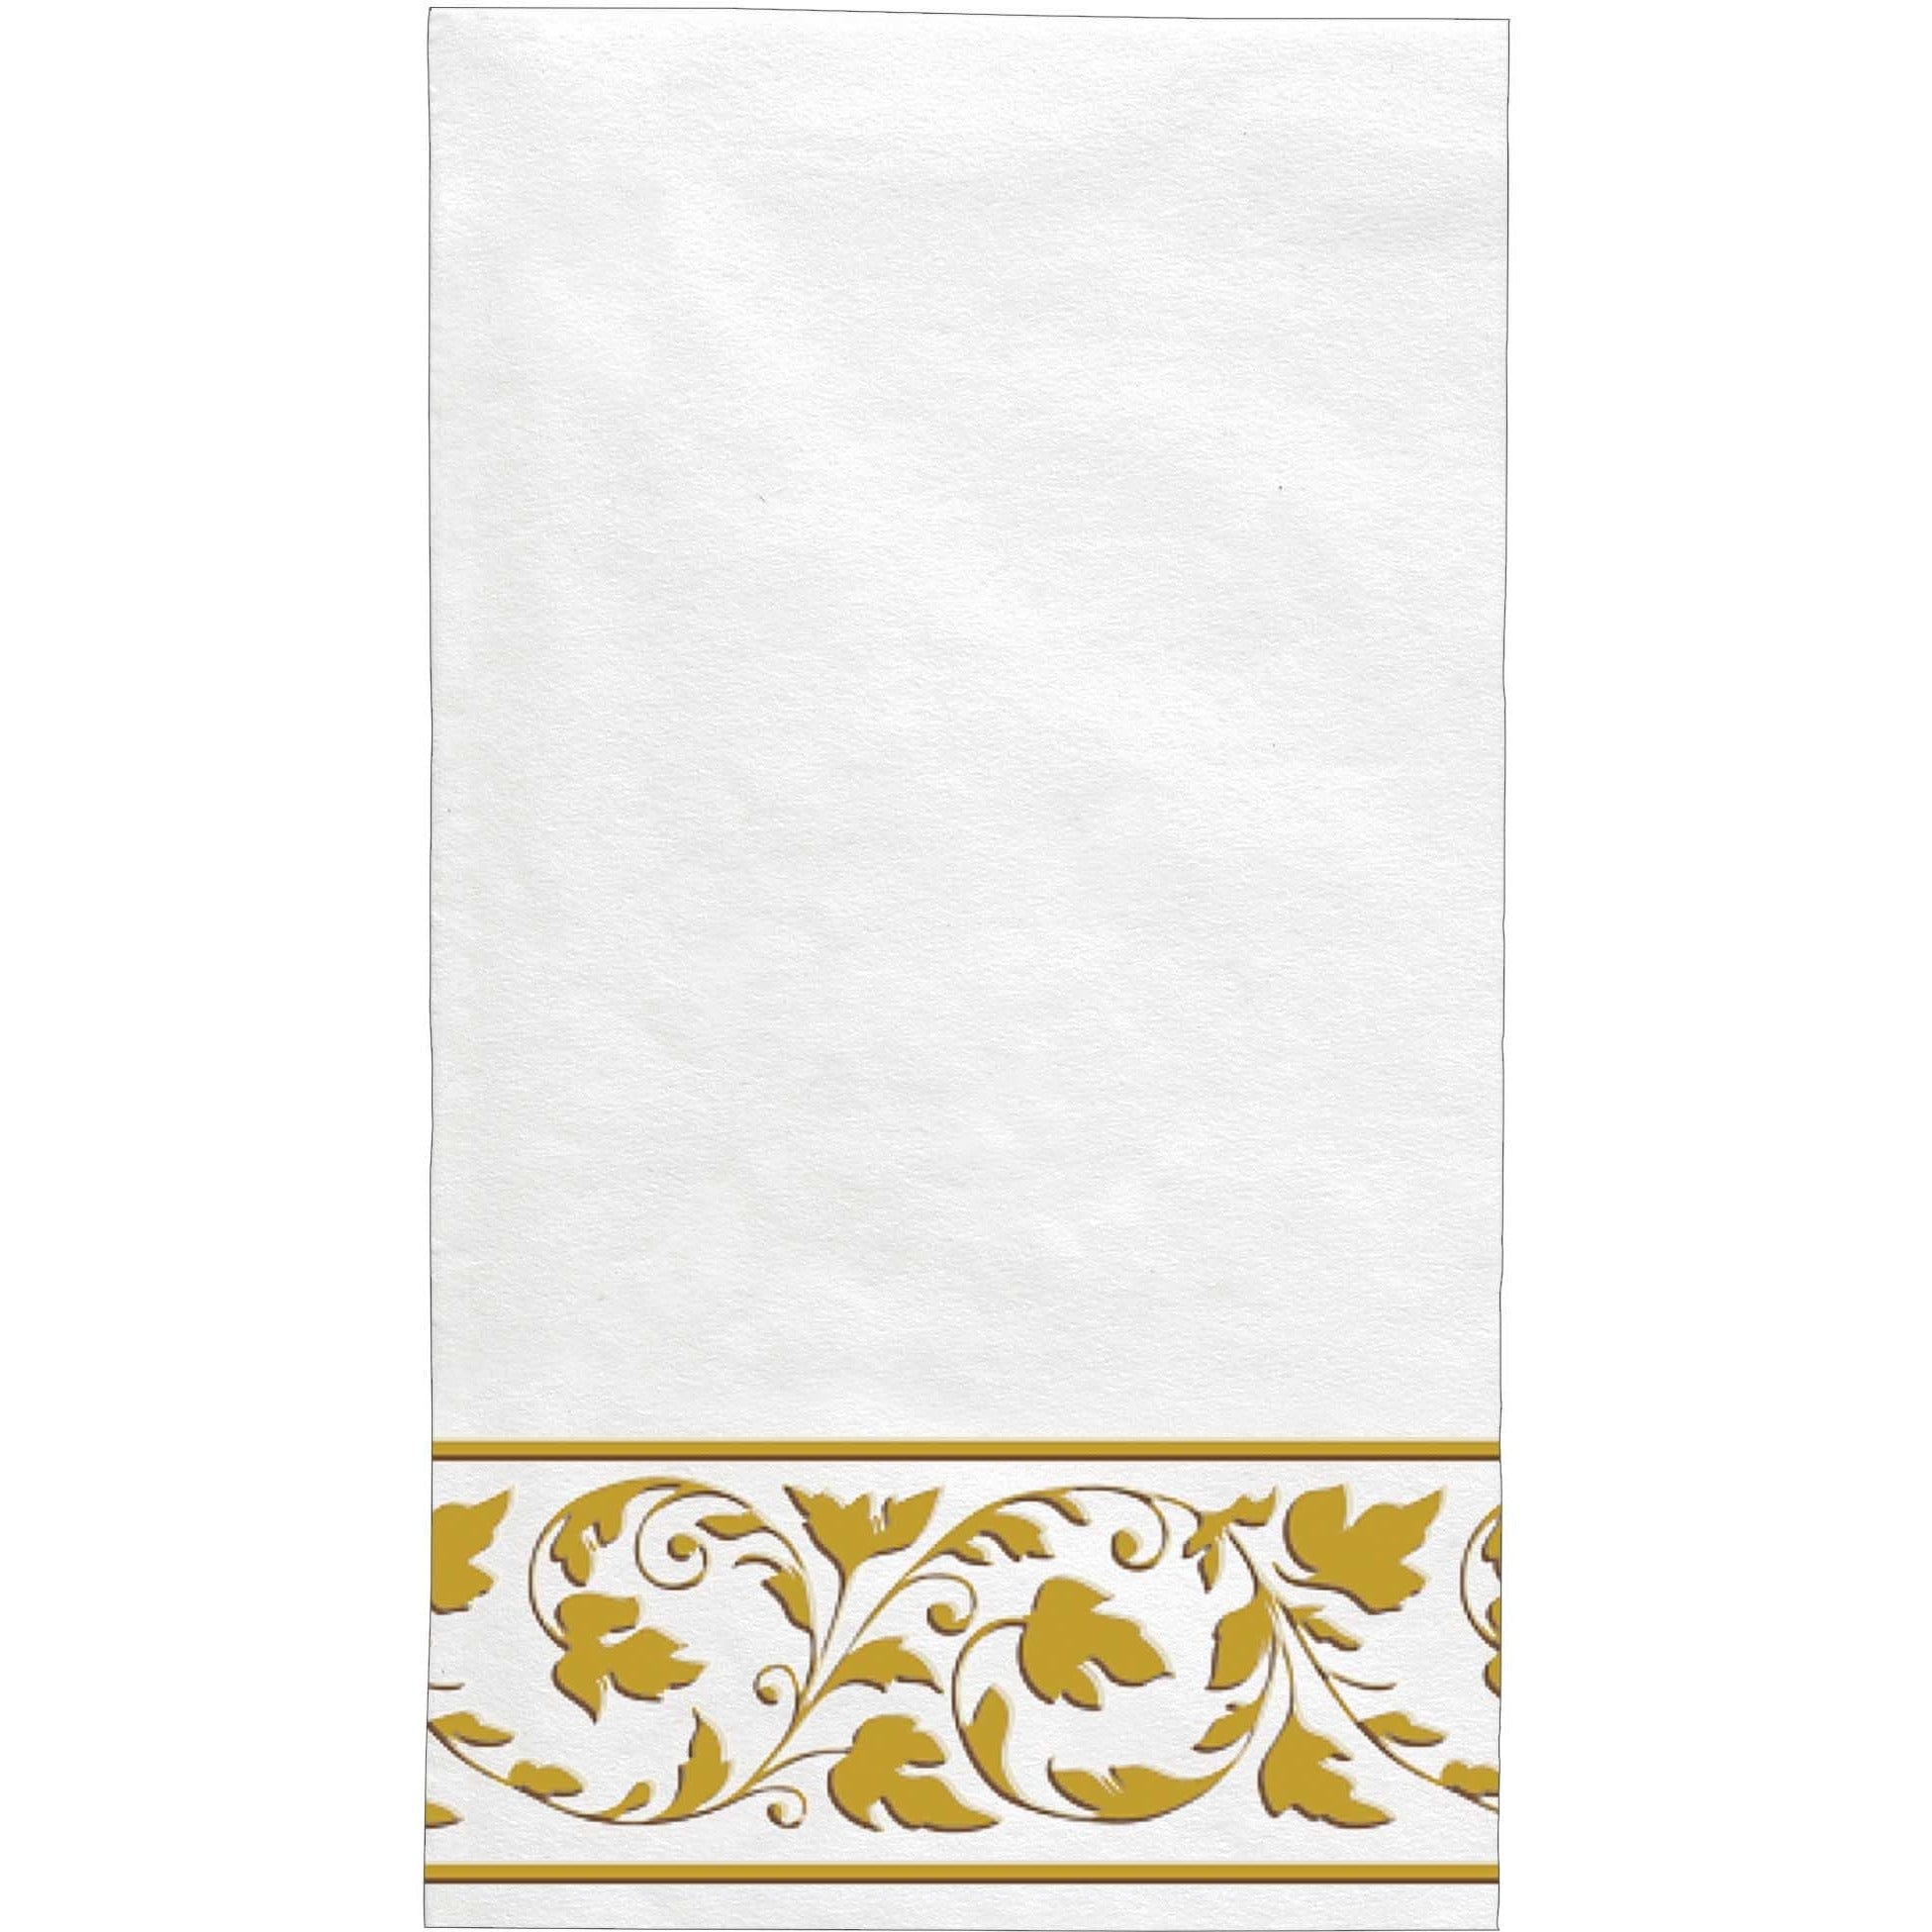 Amscan BASIC White With Gold Trim Premium Quality Guest Towels